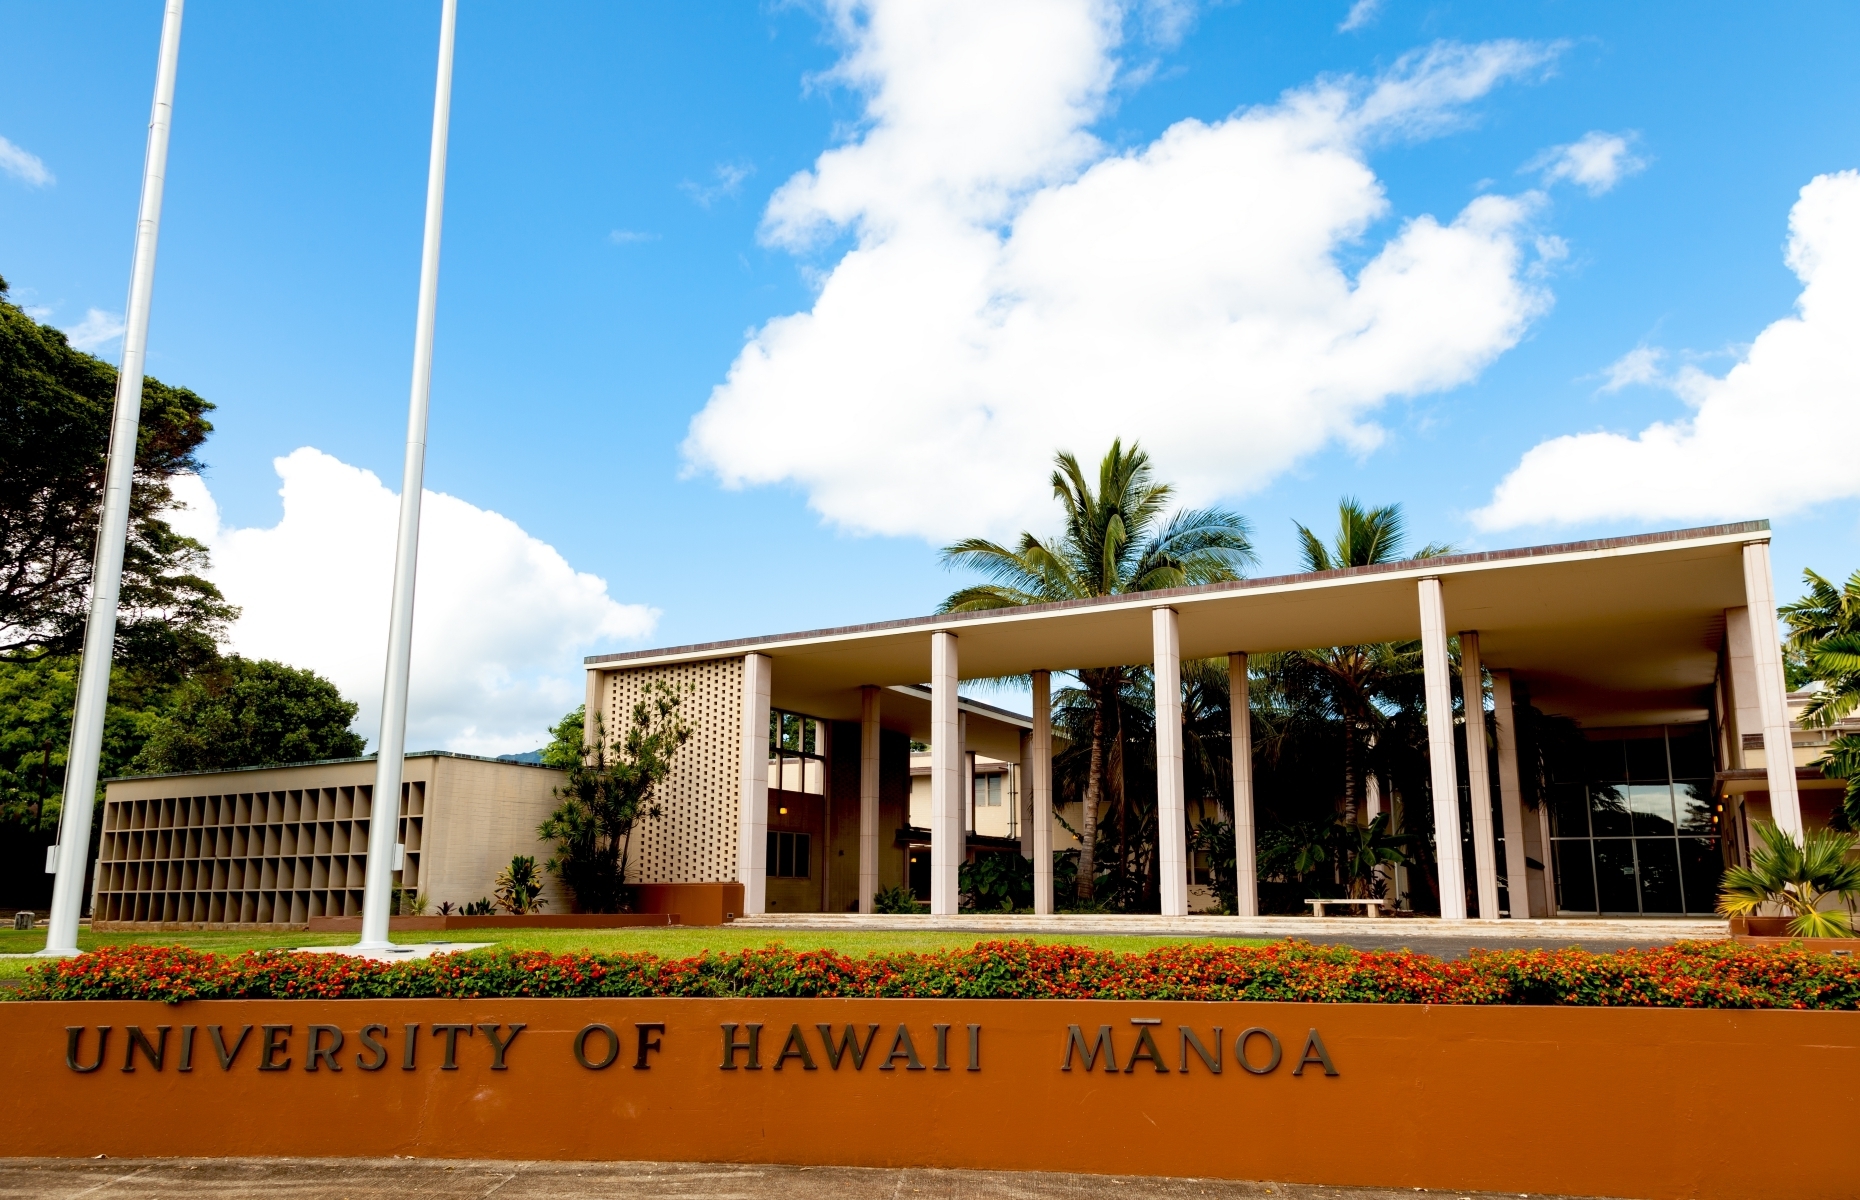 <p>The <a href="http://manoa.hawaii.edu/" rel="noreferrer noopener">University of Hawaii at Manoa</a> has an unbeatable location among the lush greenery of Honolulu’s Manoa Valley, a residential neighborhood near Waikiki Beach with great views of Diamond Head, a volcanic crater.</p>